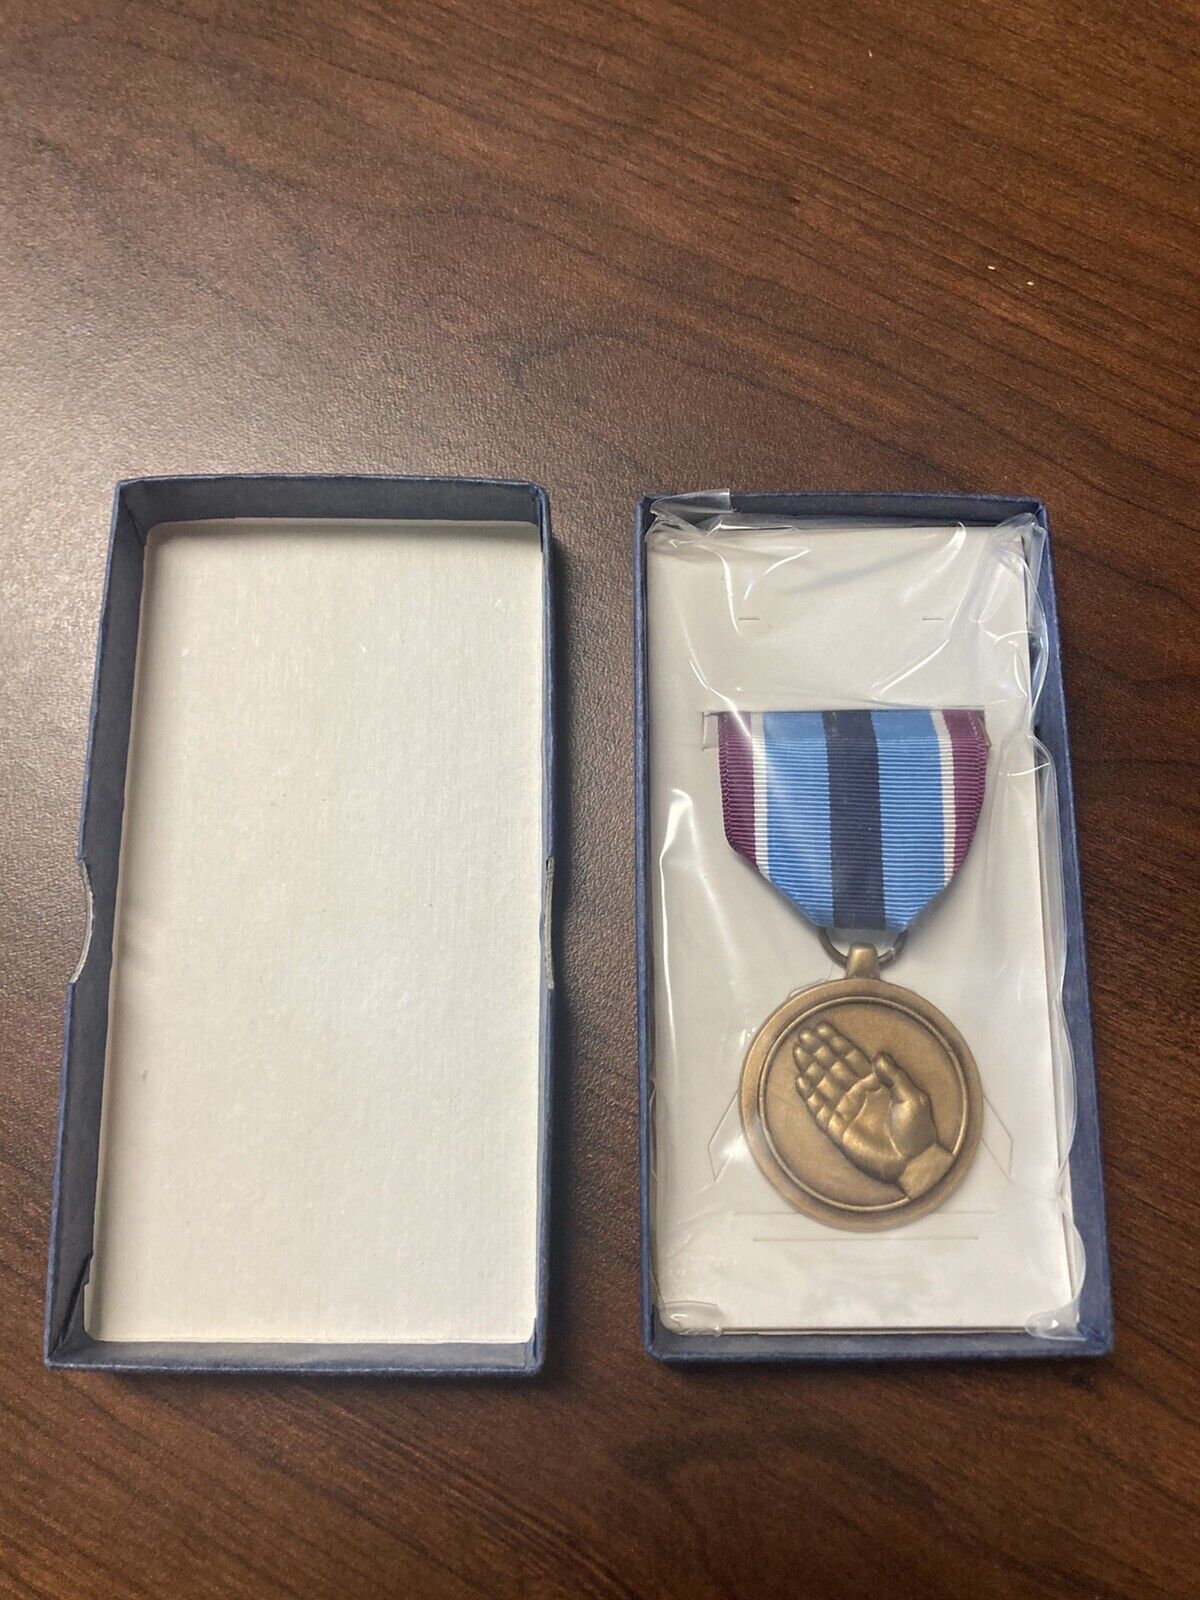 U.S. Humanitarian Service Medal, NOS, Dated 1979